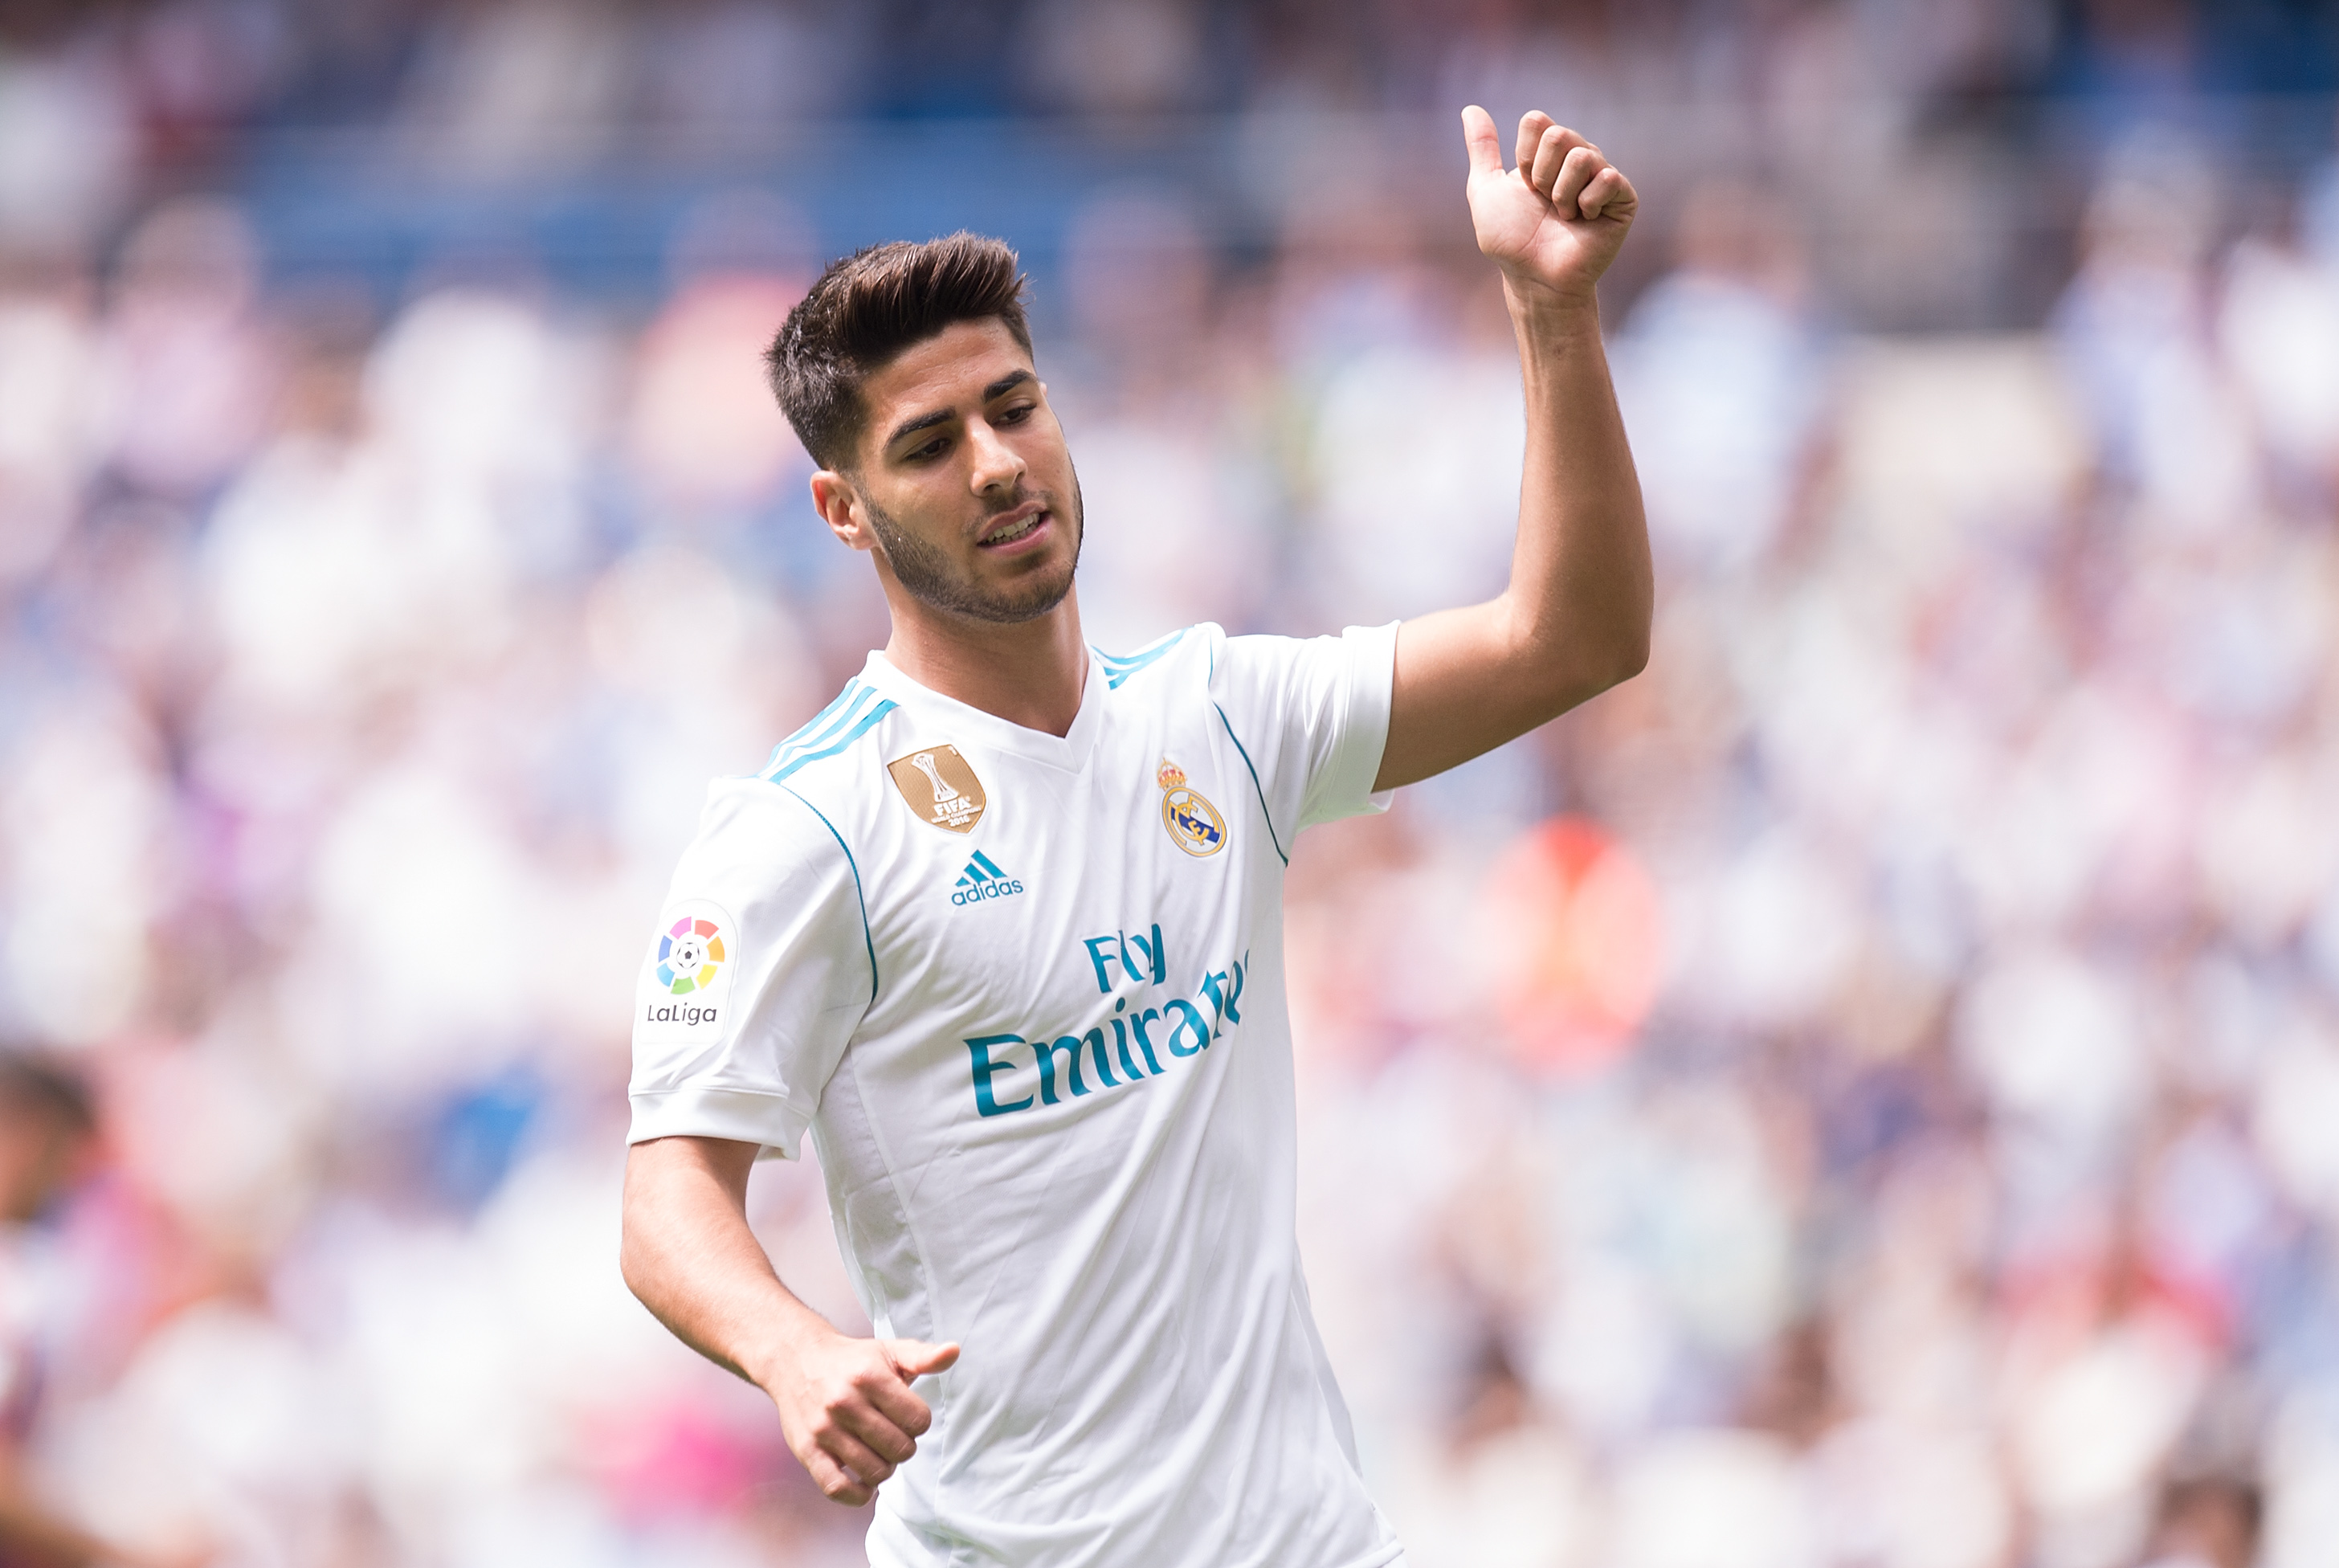 MADRID, SPAIN - SEPTEMBER 09: Marco Asensio of Real Madrid CF reacts during the La Liga match between Real Madrid and Levante at Estadio Santiago Bernabeu on September 9, 2017 in Madrid, Spain . (Photo by Denis Doyle/Getty Images)